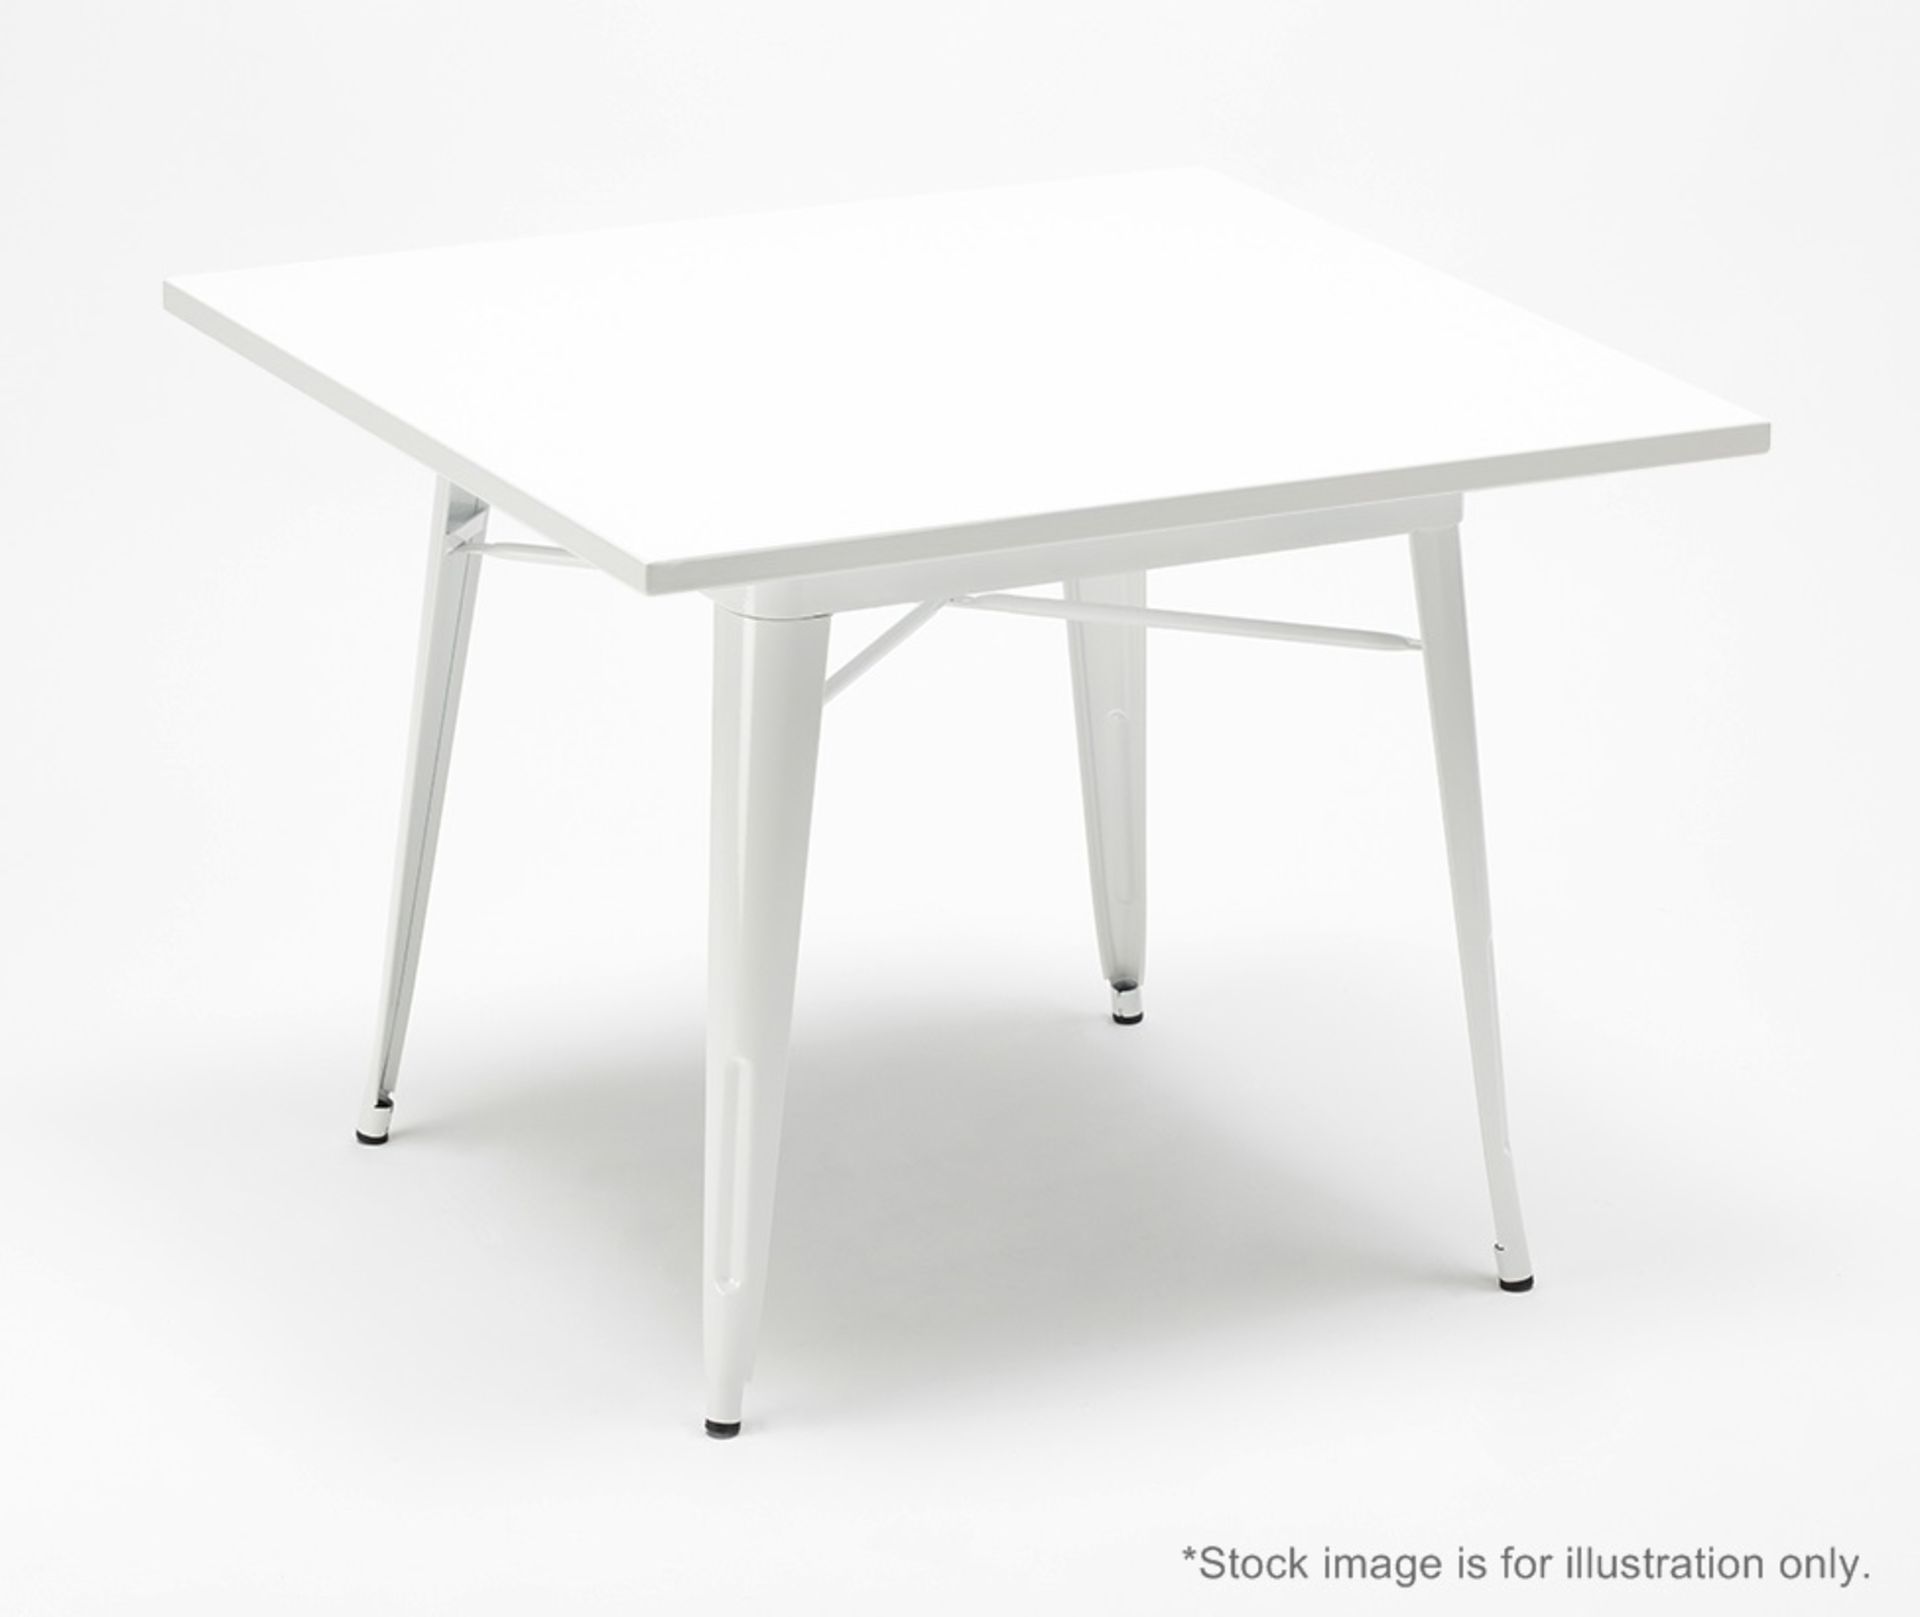 1 x Xavier Pauchard / Tolix Inspired Industrial Outdoor Table In White - Dimensions: 80 x 80 x H75cm